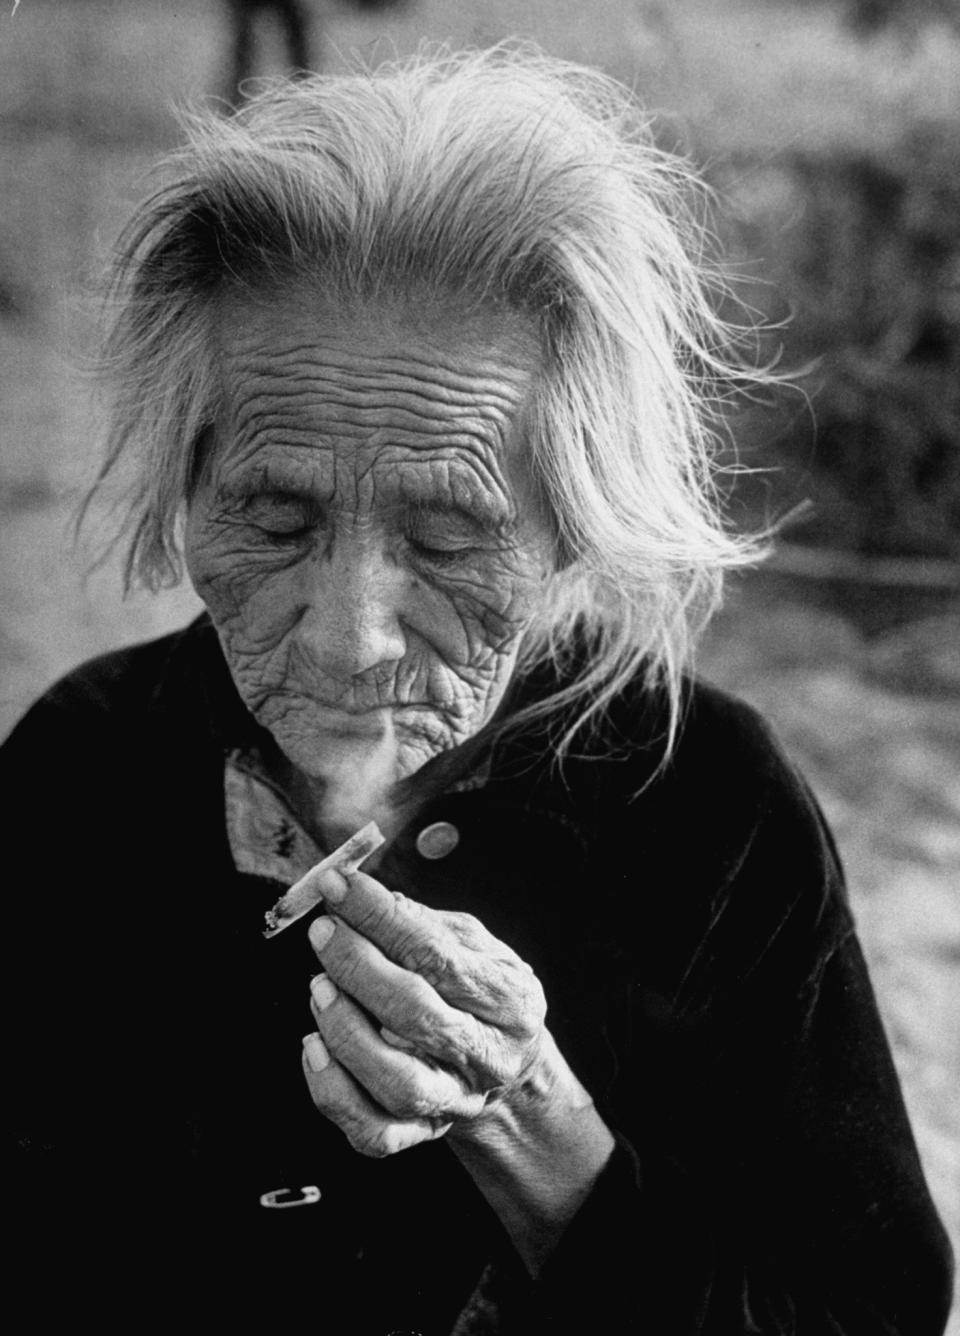 A Navajo woman smoking a hand rolled cigarette.